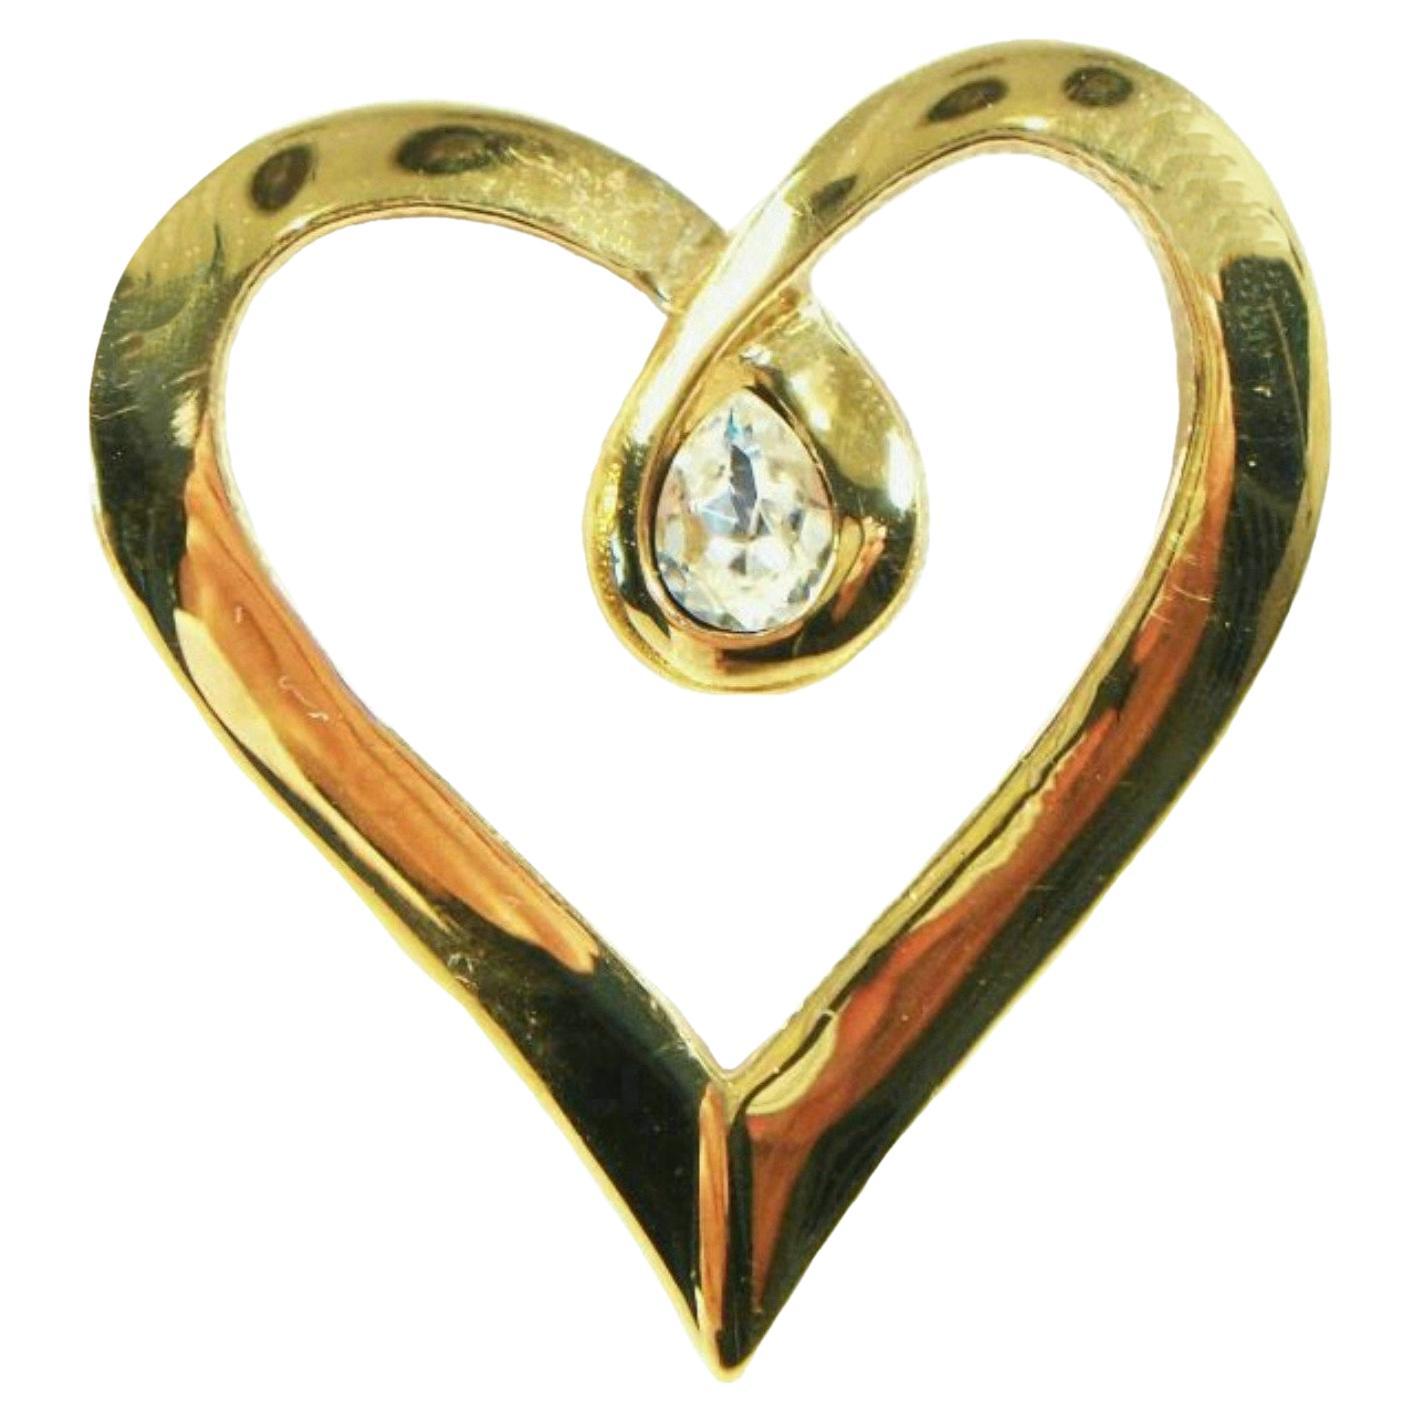 BUTLER - Vintage Gold Tone & Rhinestone Heart Brooch - Signed - Circa 1980's For Sale